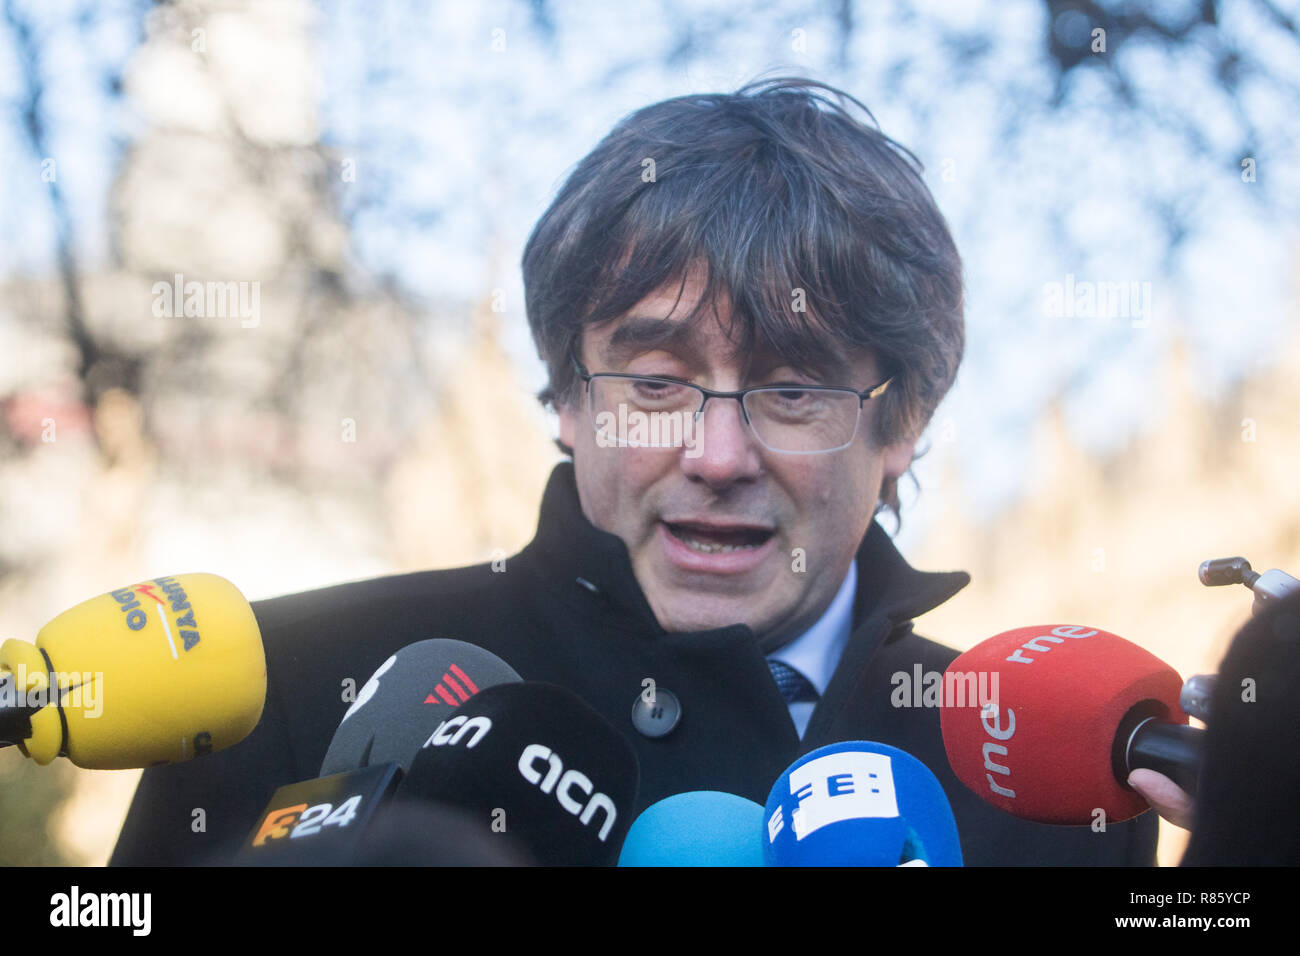 London UK. 13th December 2018. Carles Puigdemont, who served as President of the Government of Catalonia from January 2016 to October 2017 and was later removed from office by the Spanish Government following the unilateral Catalan declaration of independence gives interviews in College Green  Westminster Credit: amer ghazzal/Alamy Live News Stock Photo